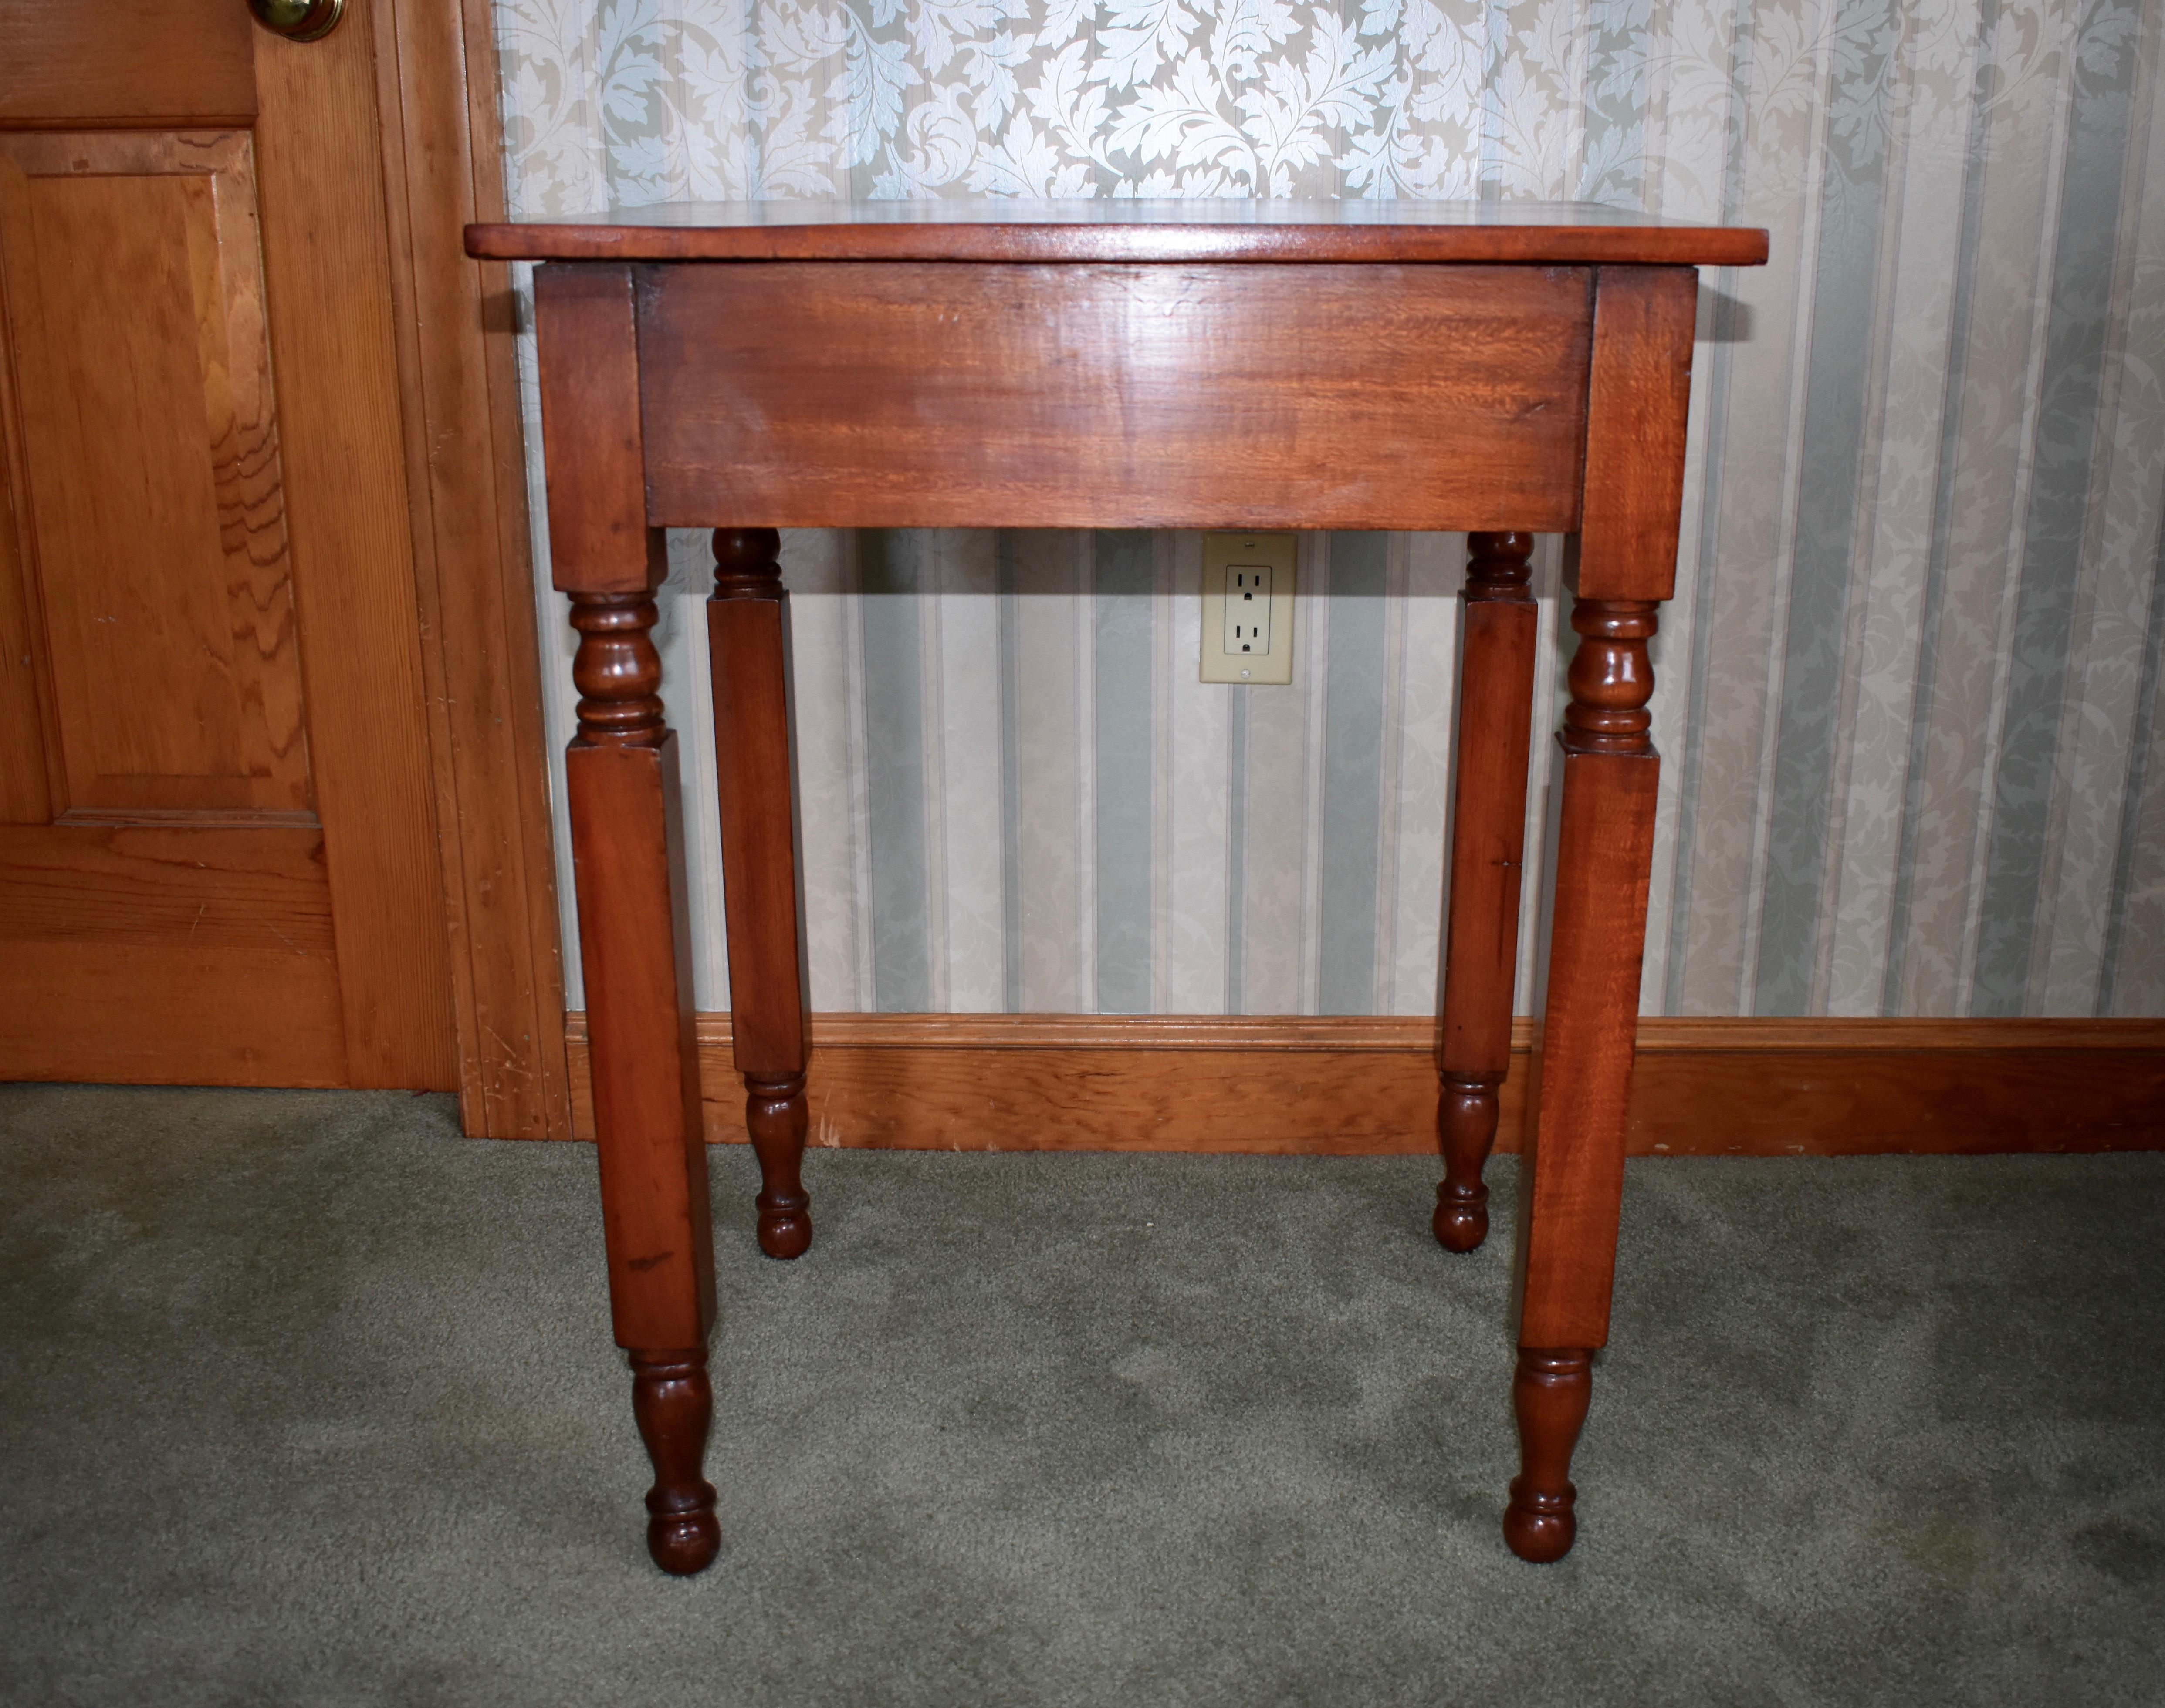 Mid-19th Century Empire One Drawer Stand in Cherry and Pine, circa 1820 Upstate, NY For Sale